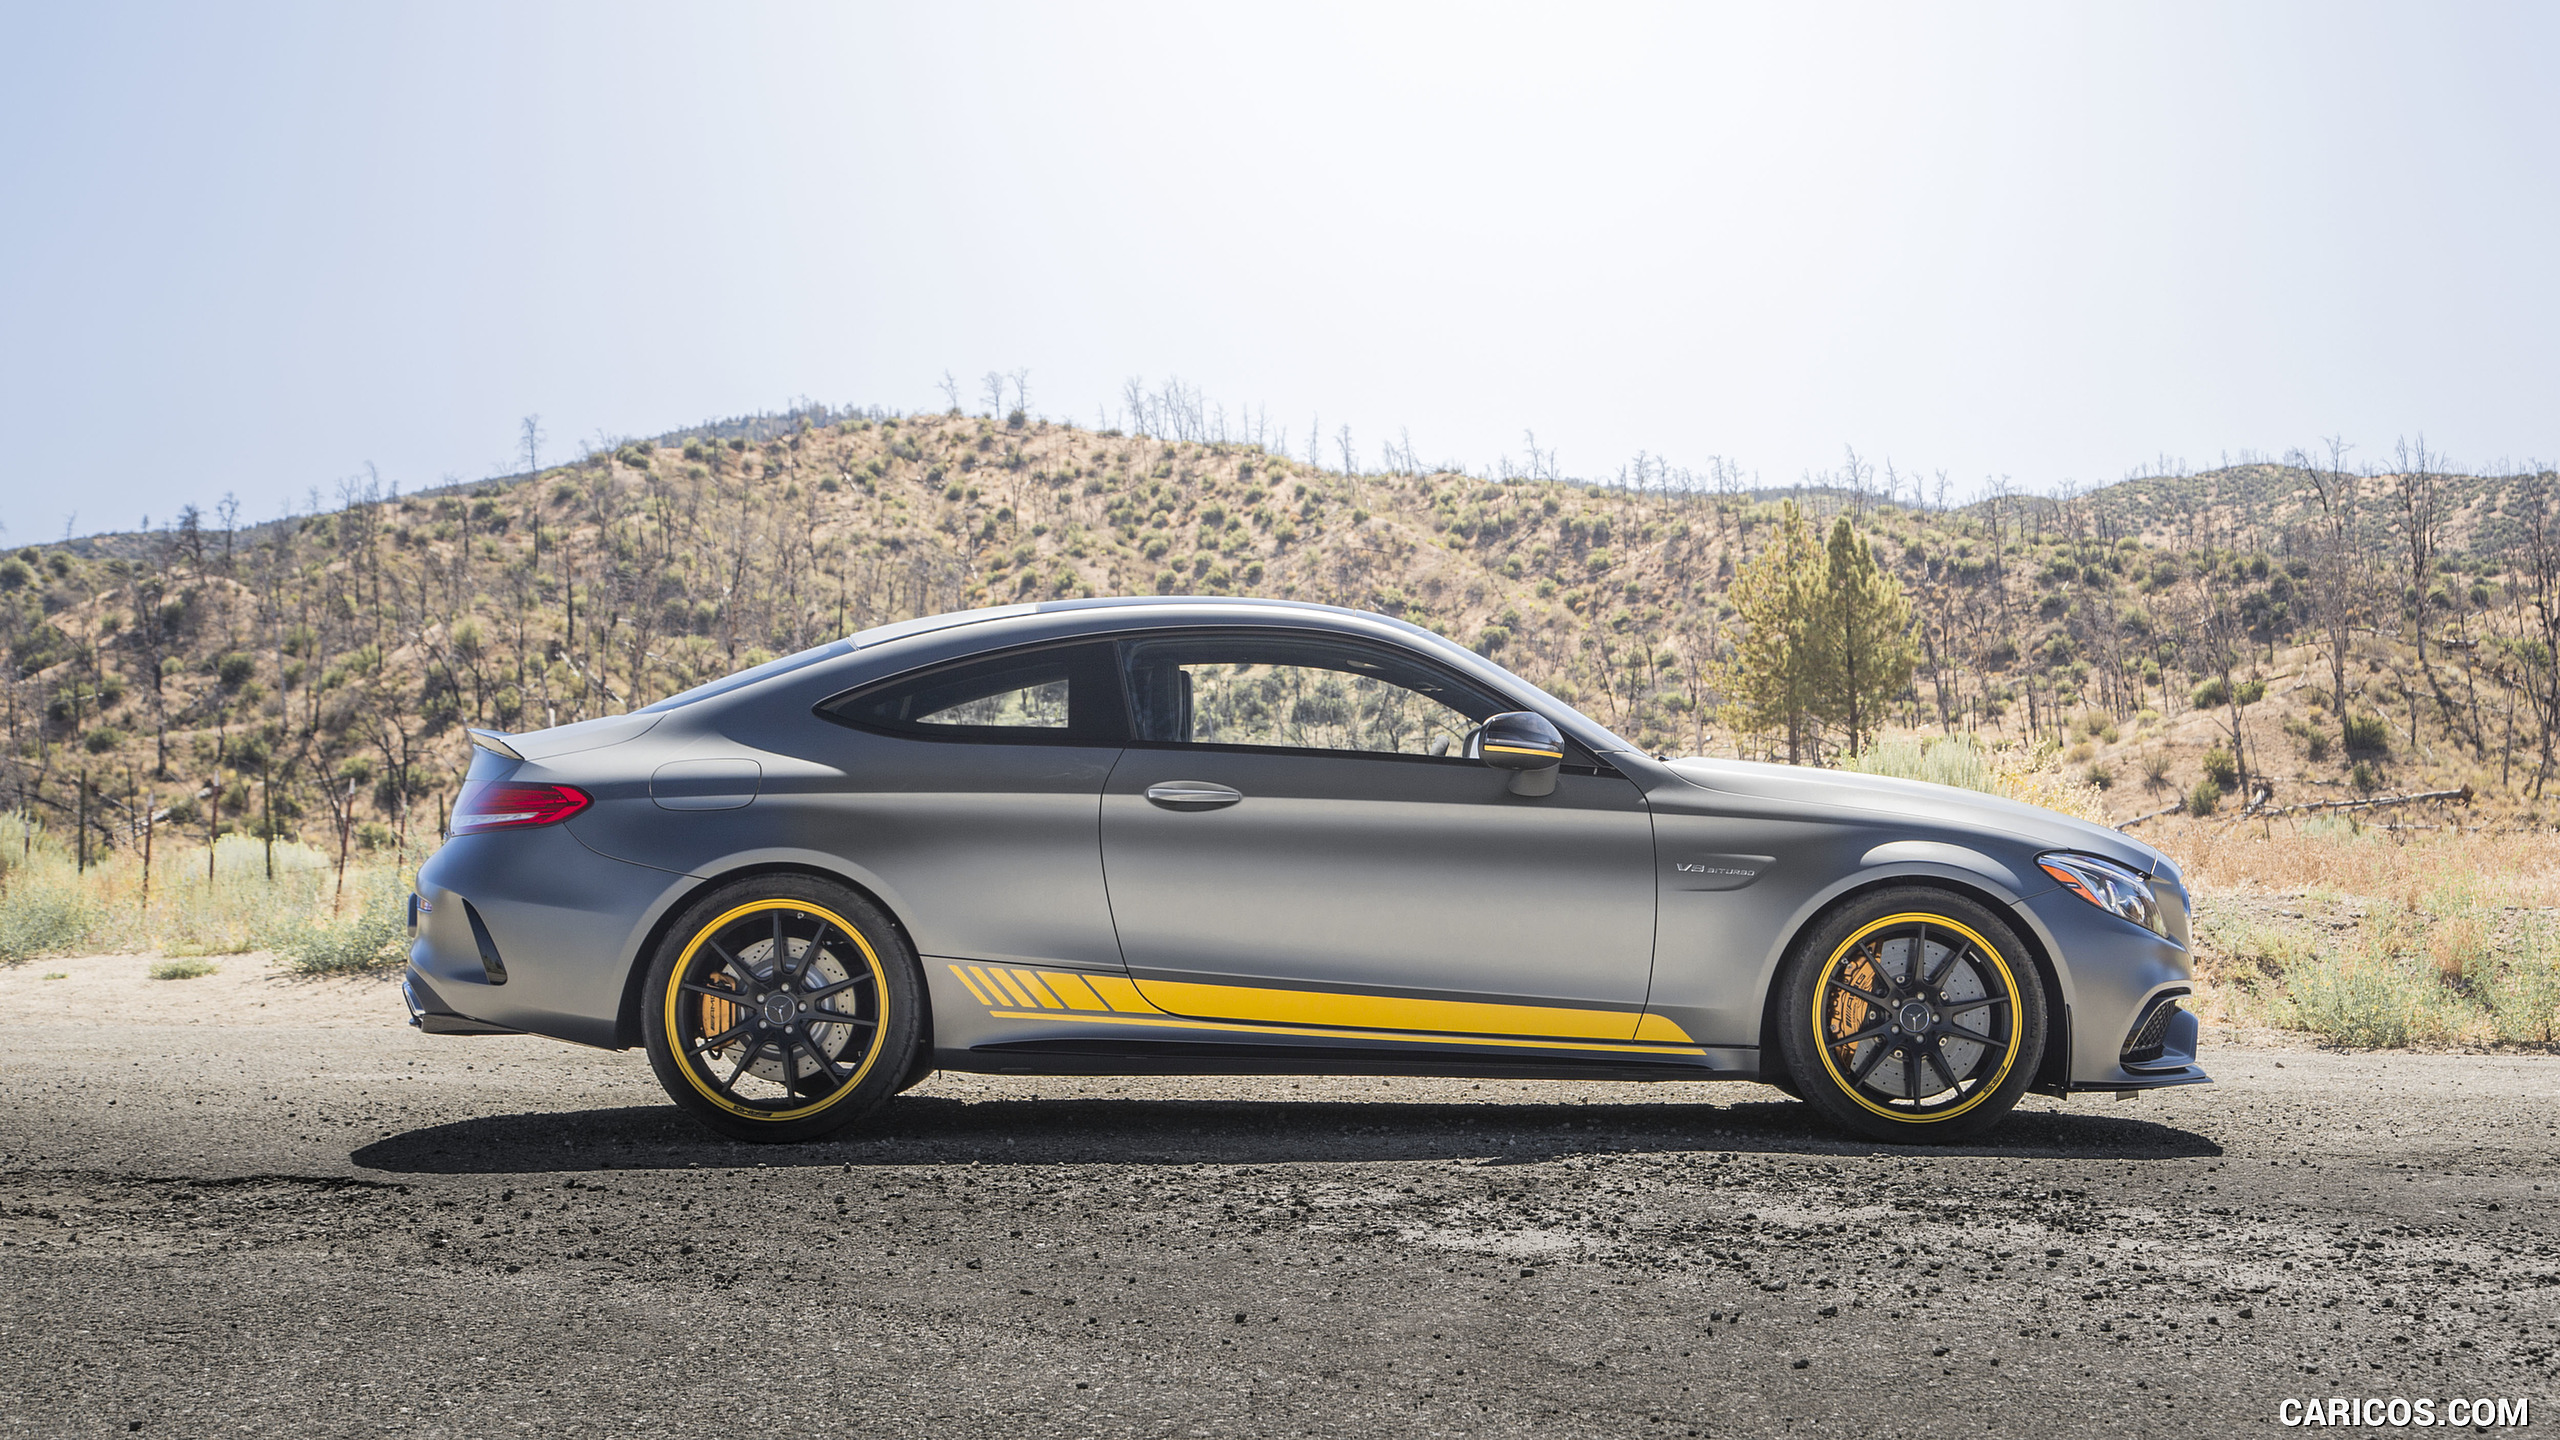 2017 Mercedes-AMG C63 S Coupe Edition One (US-Spec) - Side, #20 of 86